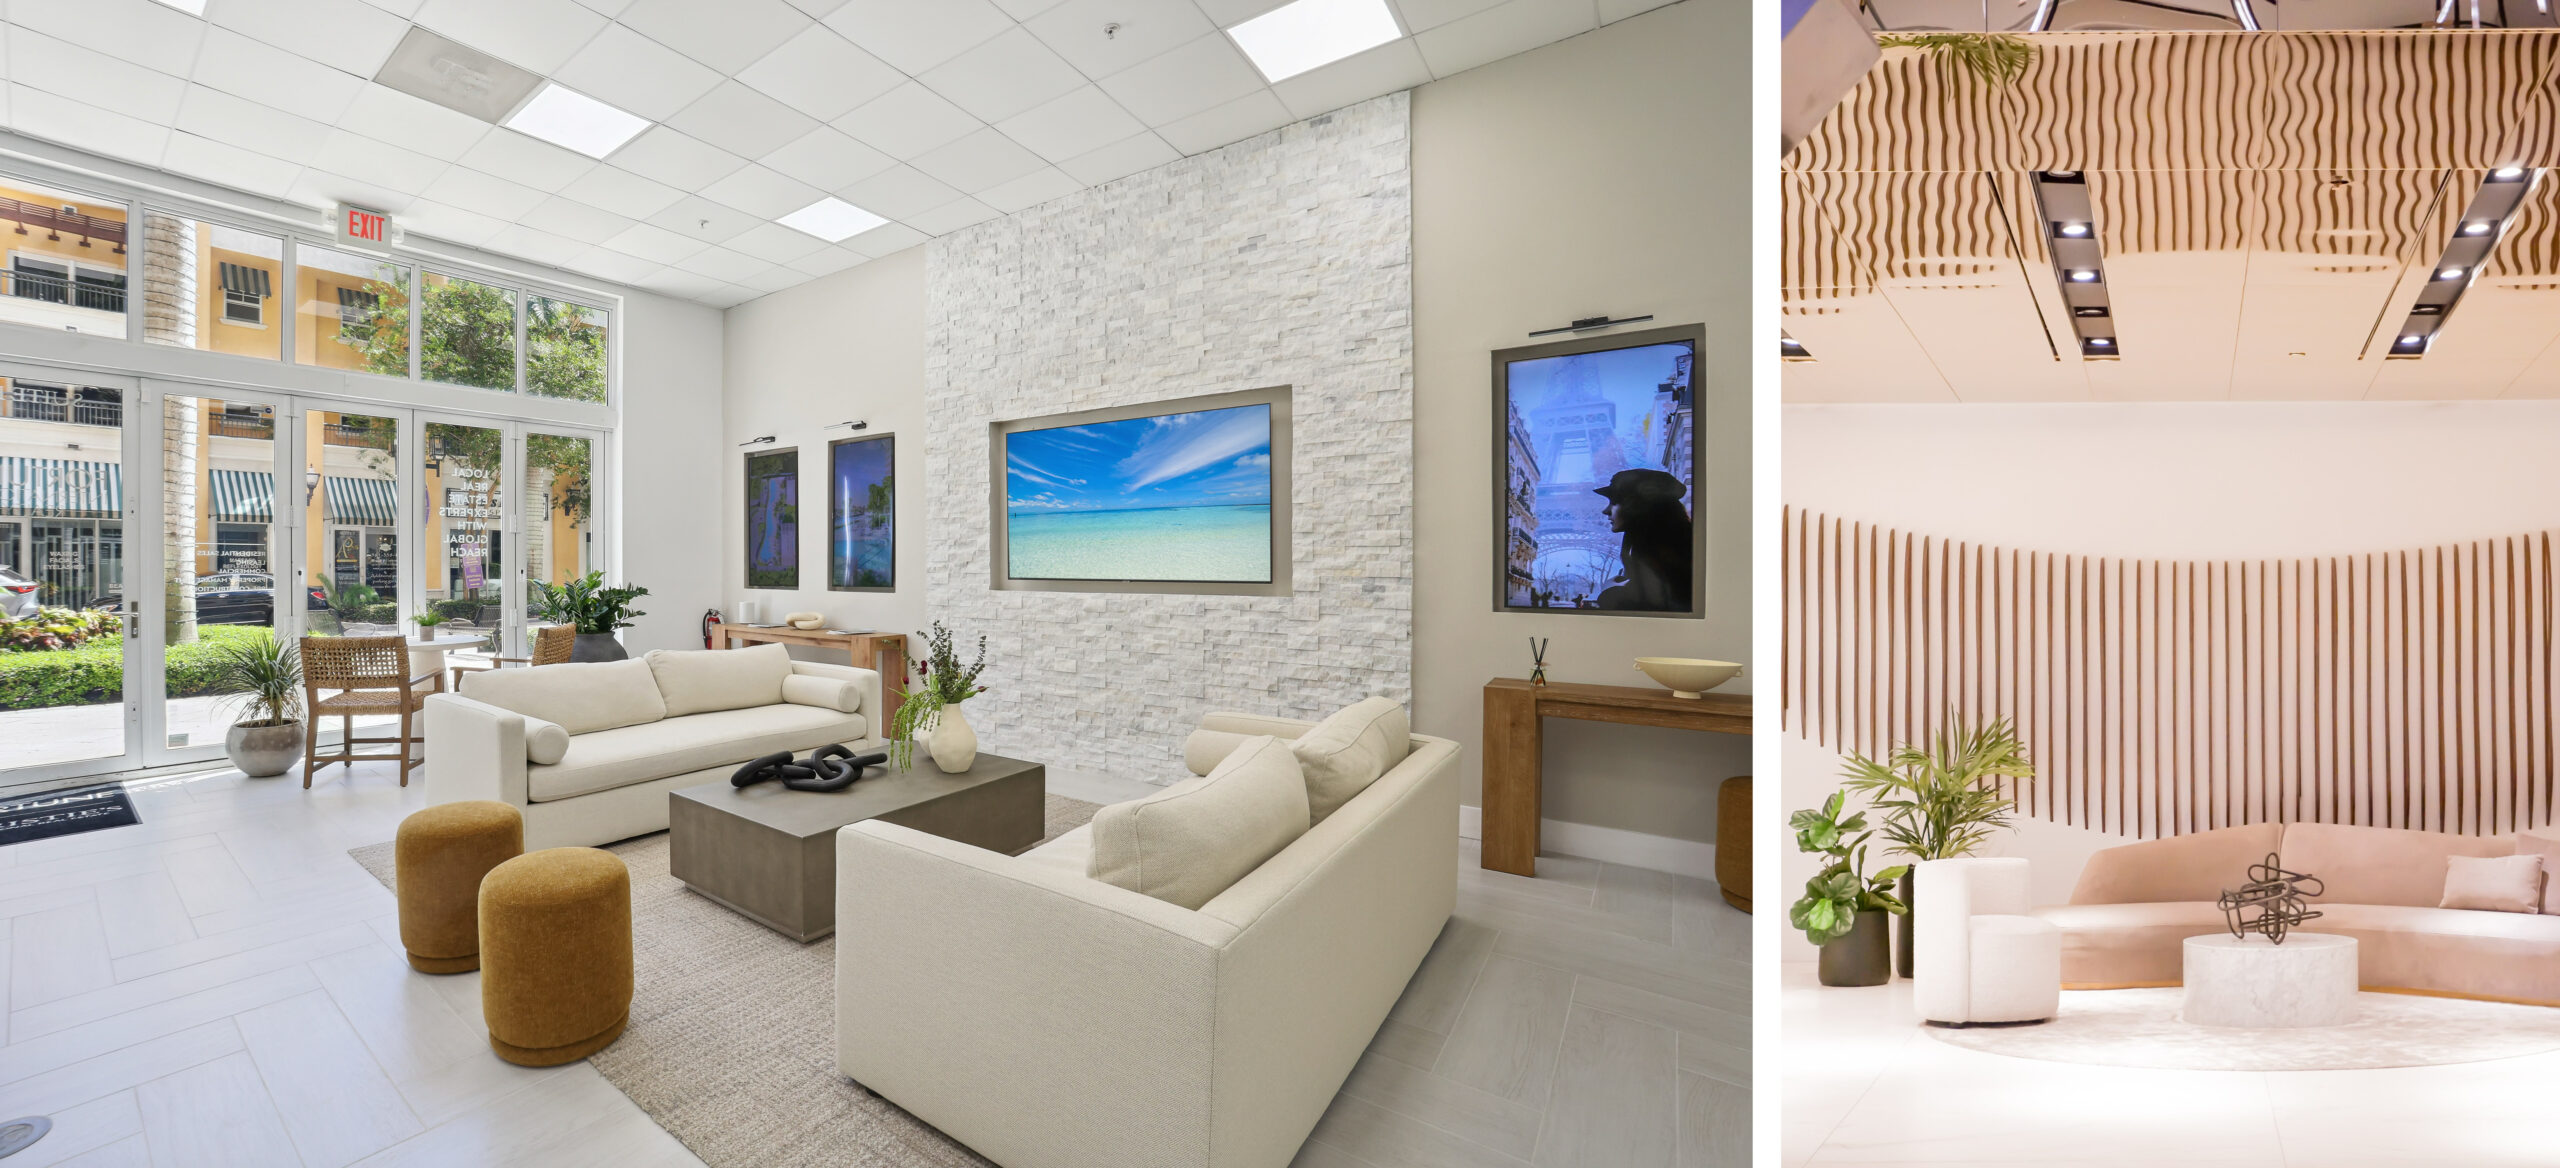 Sample work from Casa Collective Miami. Left: Fortune Christie's International Real Estate office in Boca Raton. Right: X